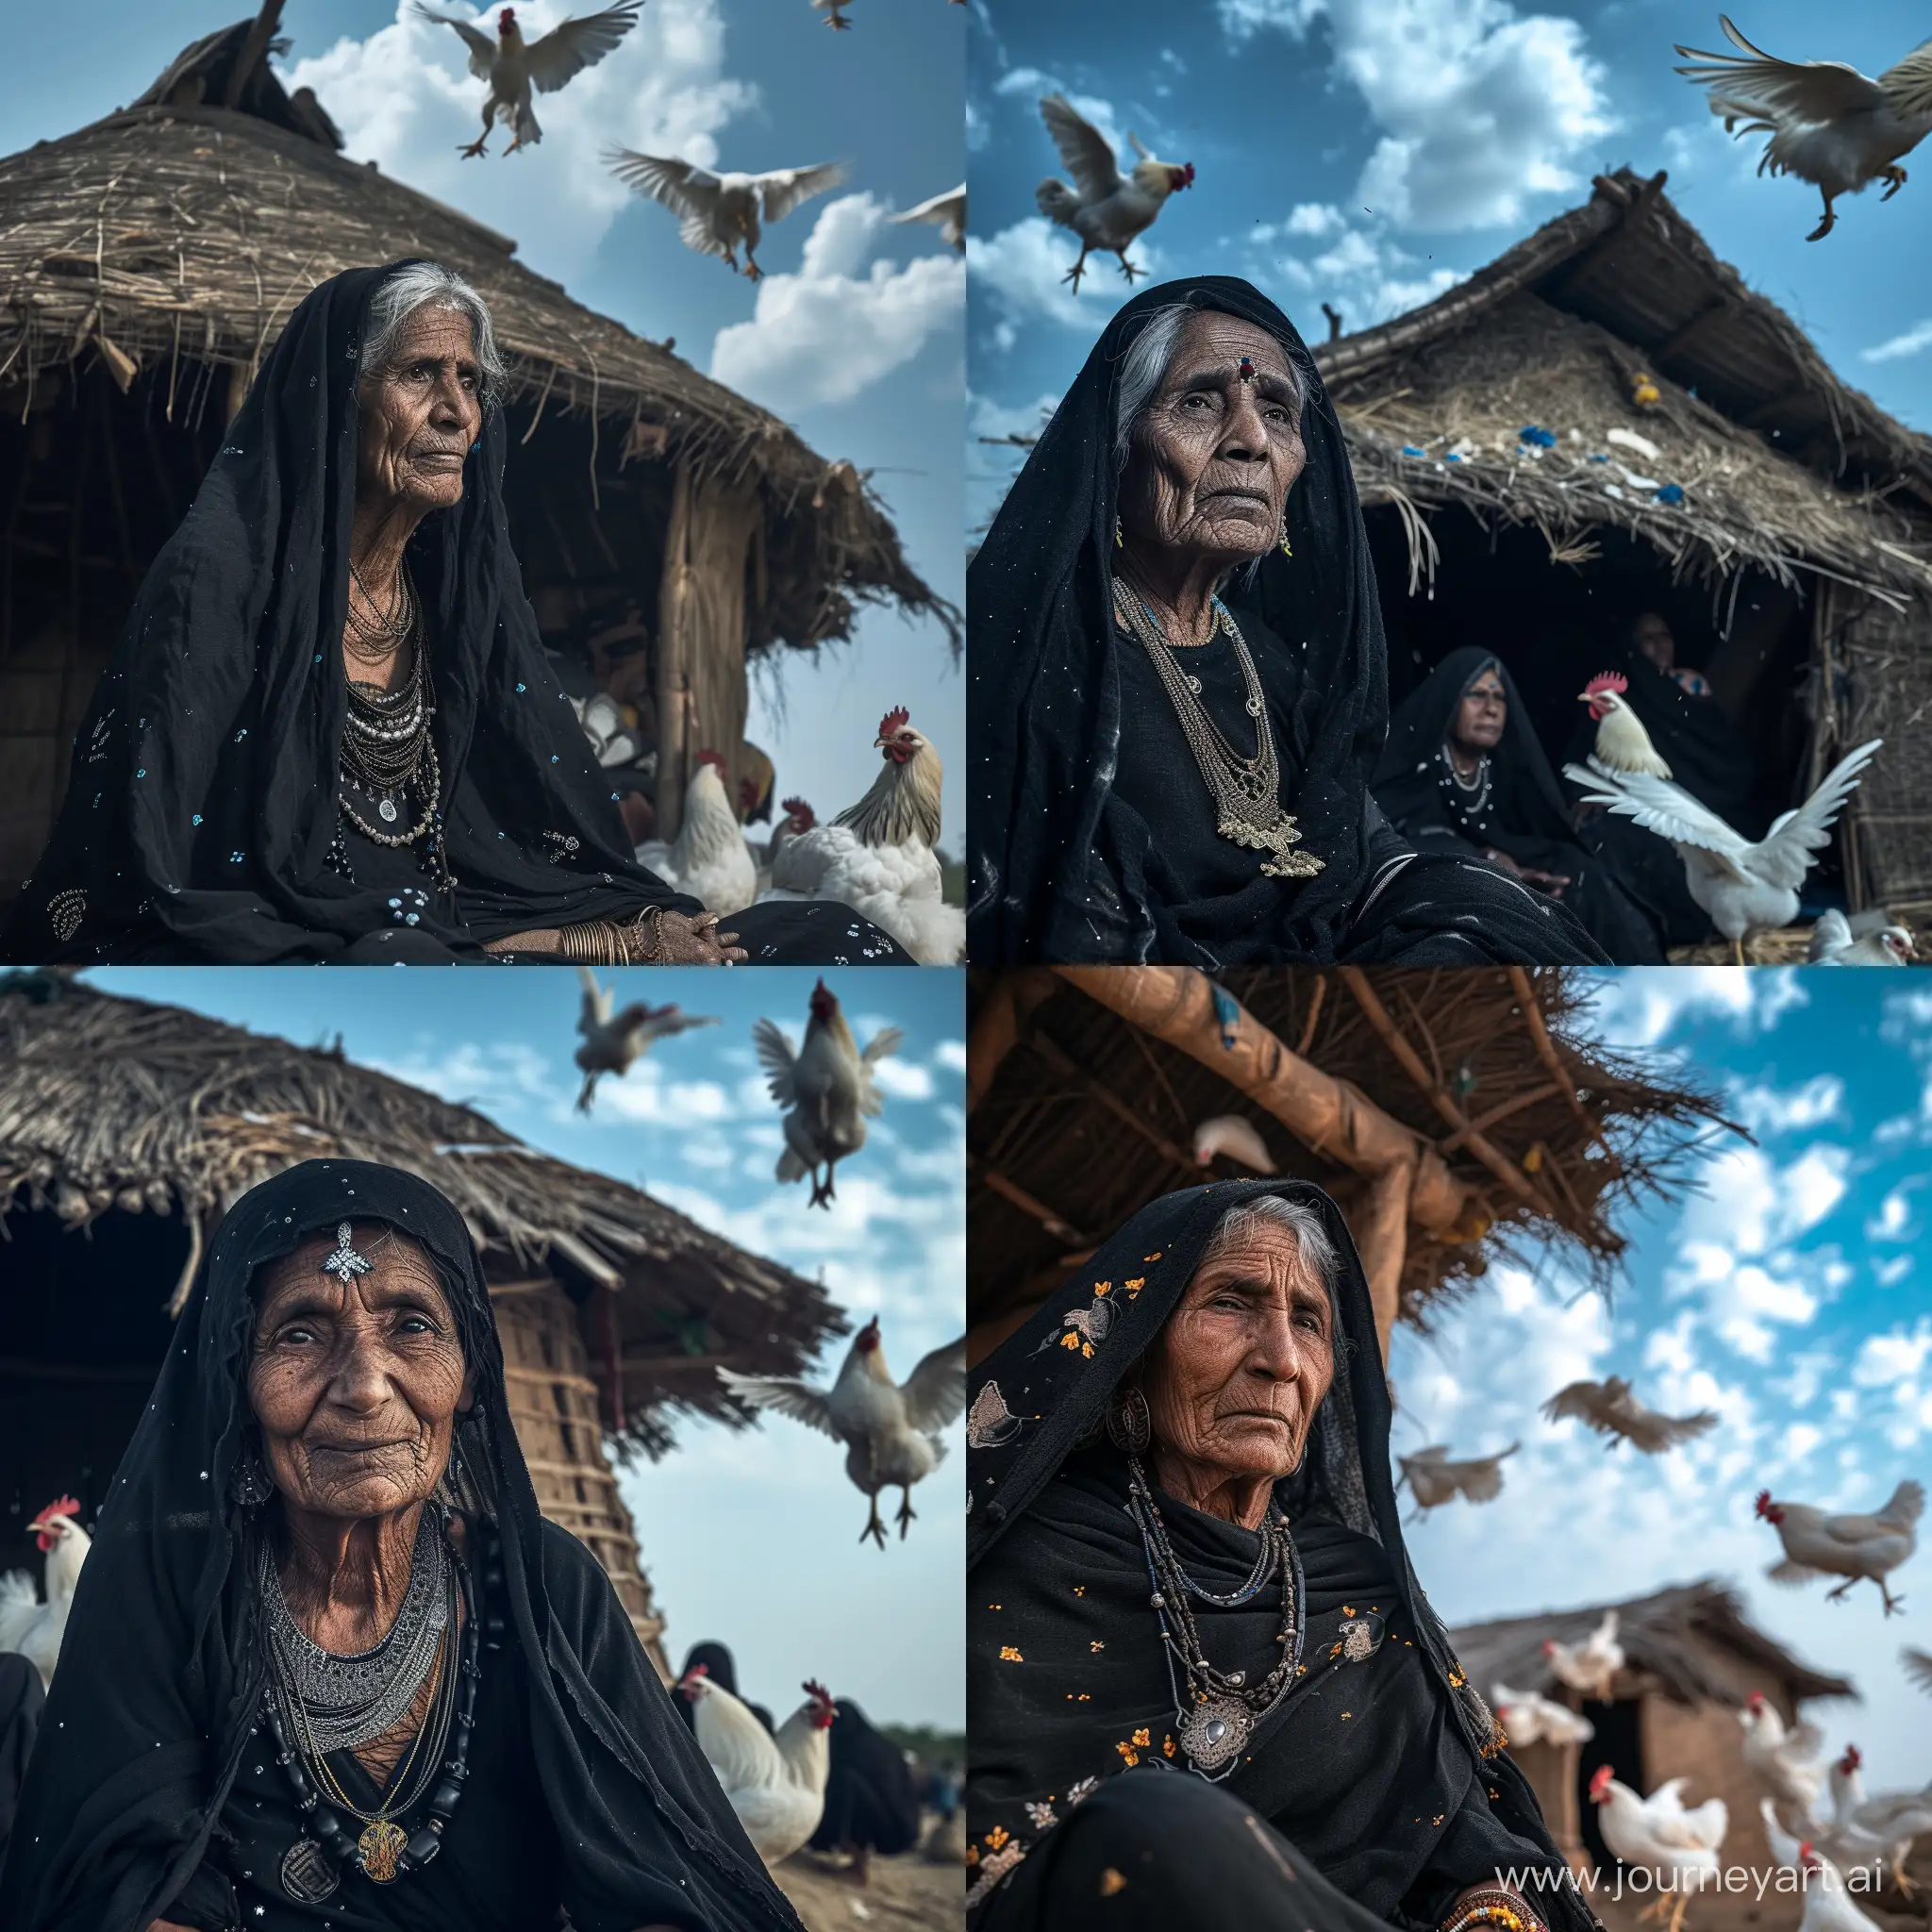   old rabari women gujarat black clothing jewerely is sitting before hut with flying  whit chickens bleu sky with clouds soft light and contrast low angle fuji xt4 35 mm